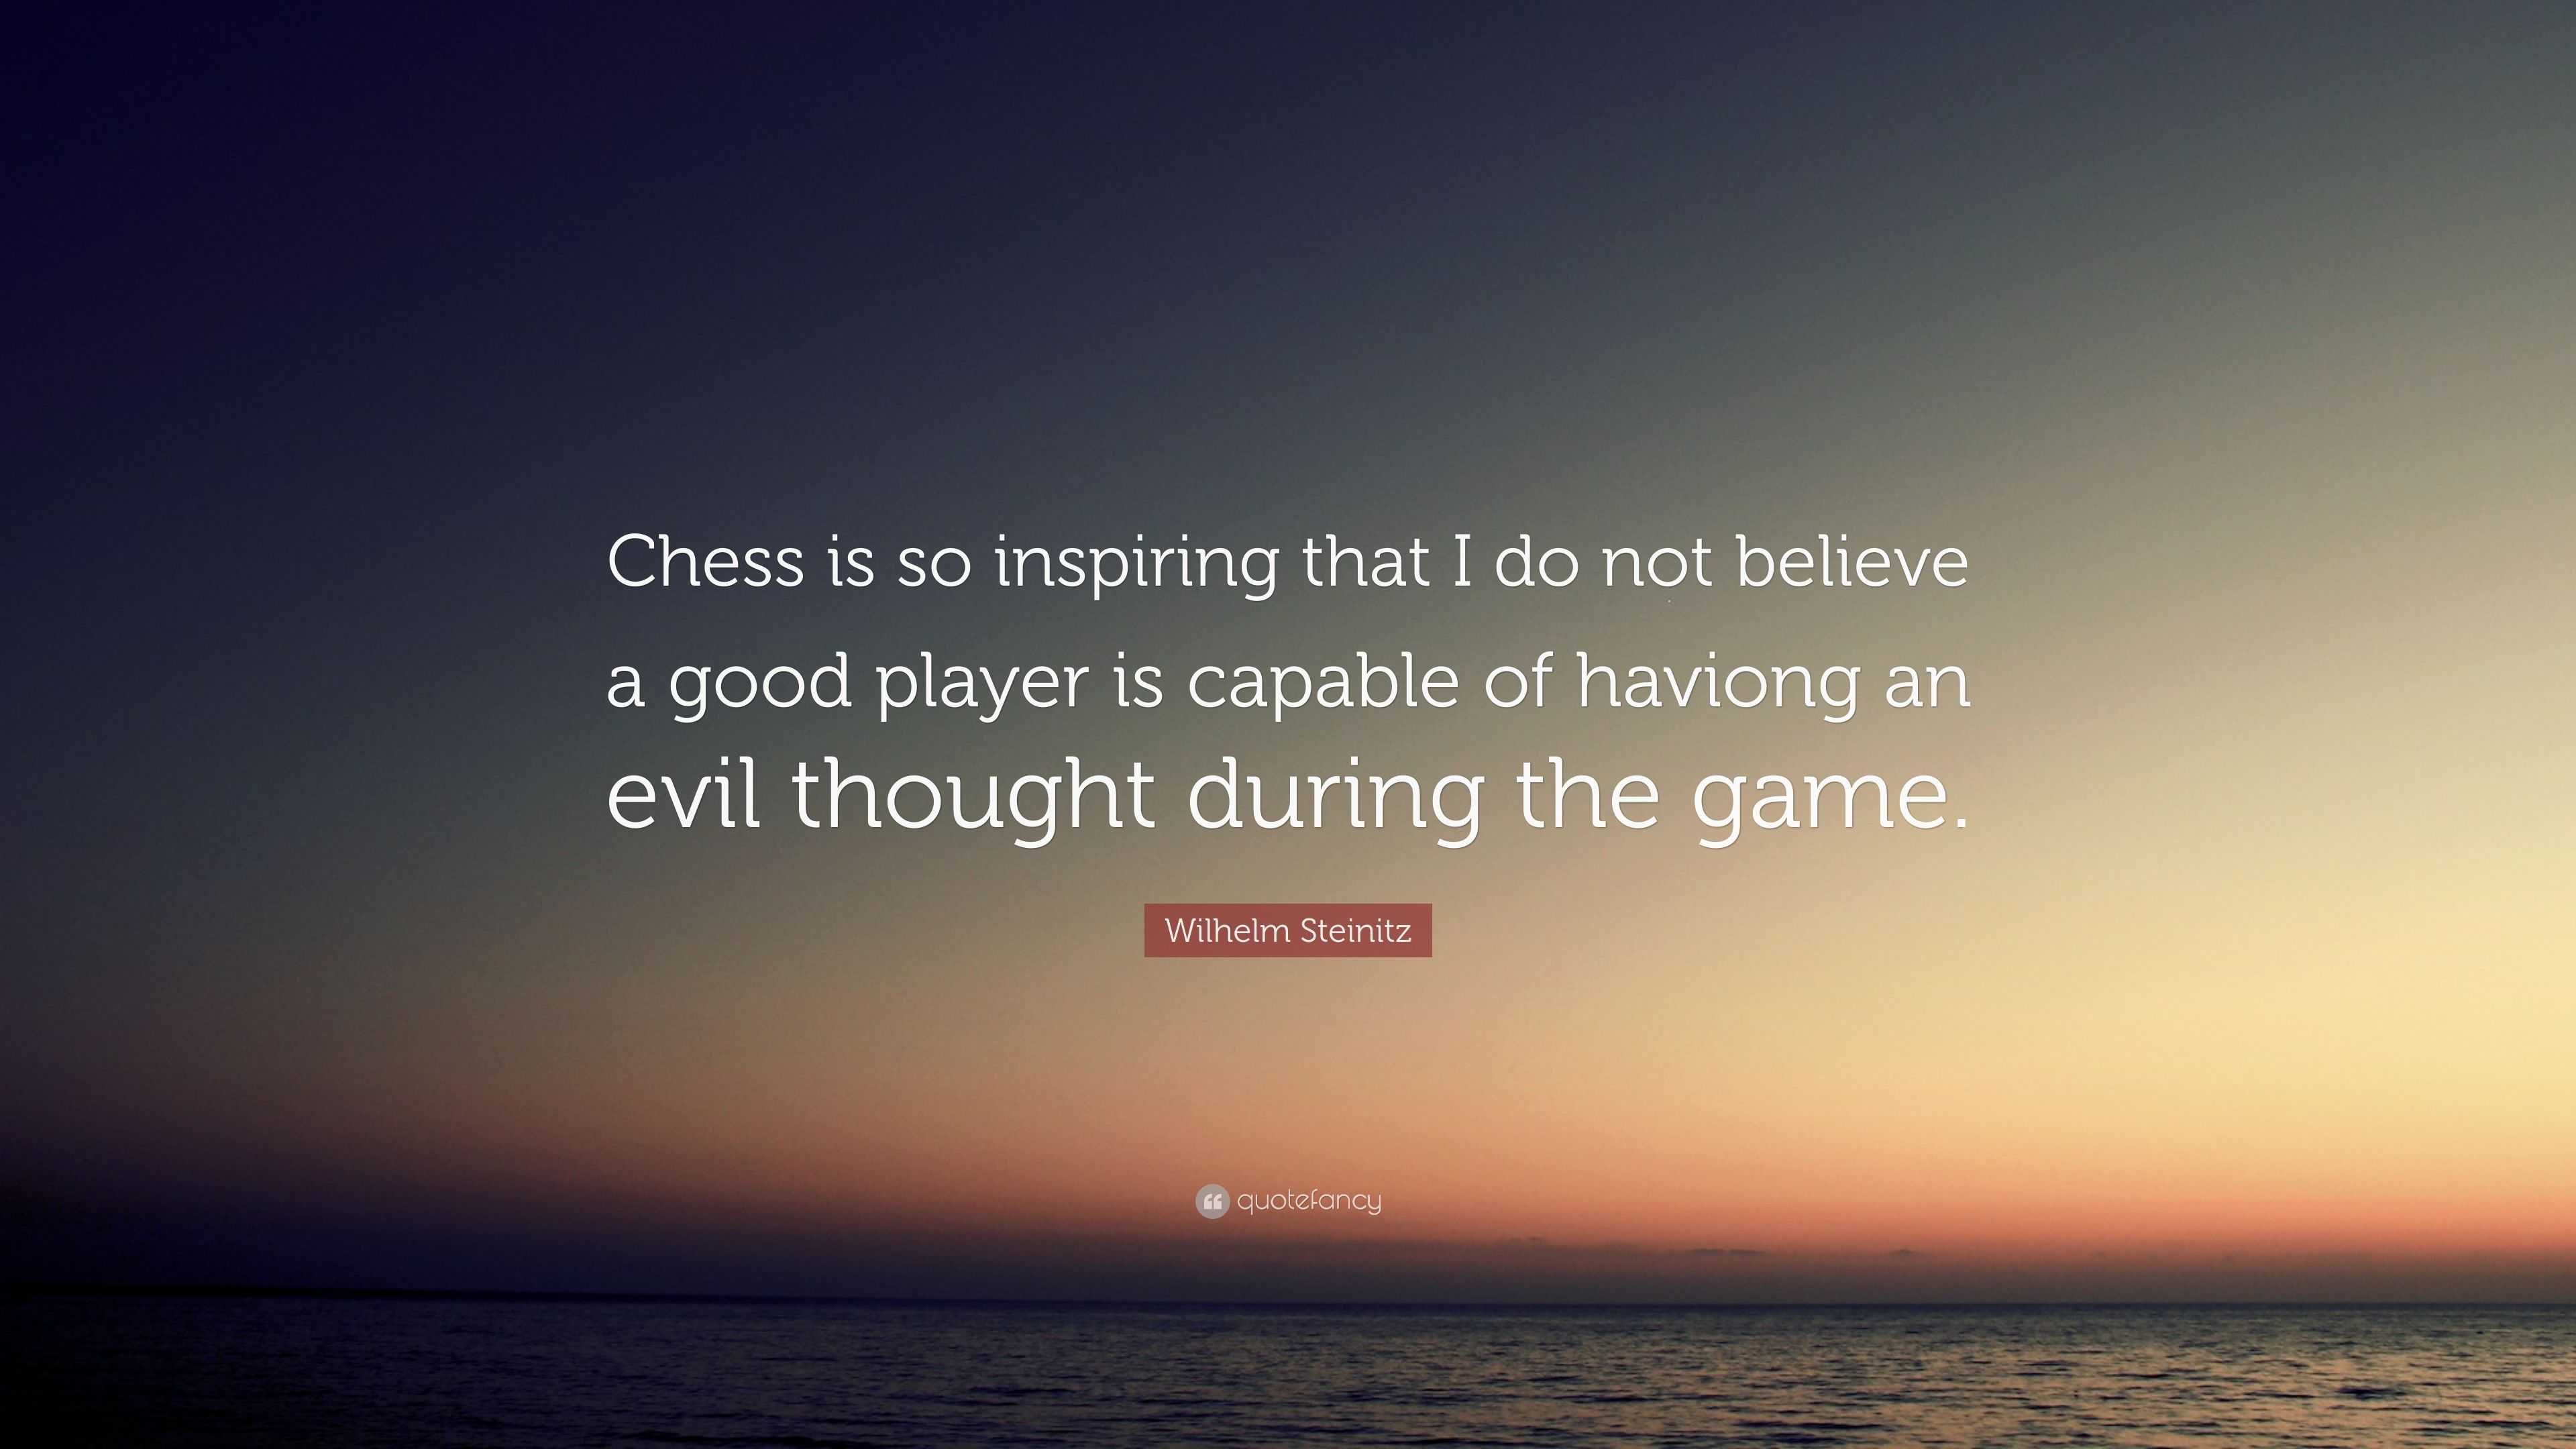 101 Quotes About Chess  Ultimate Source of Inspiration